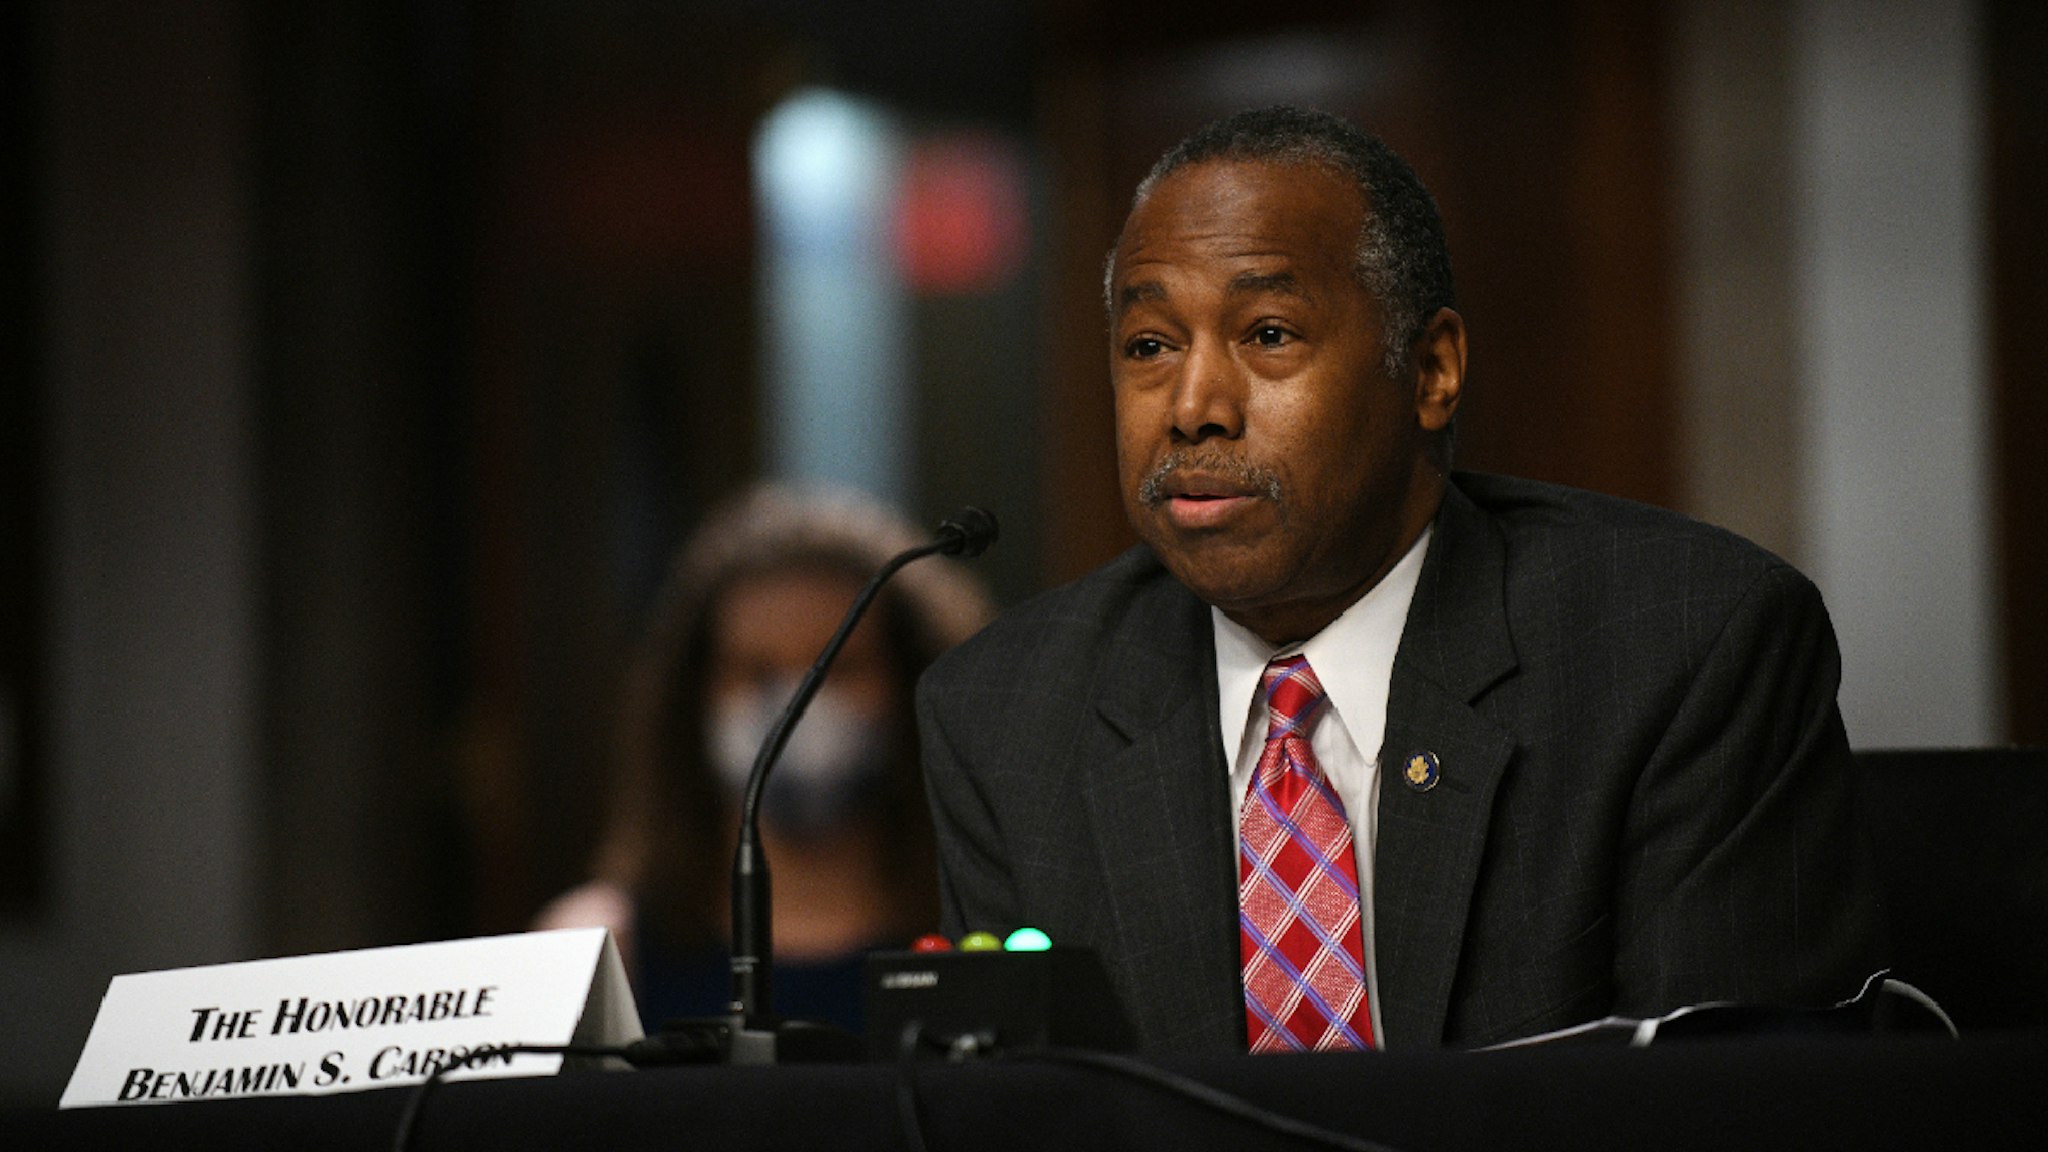 WASHINGTON, DC - JUNE 9: Ben Carson, U.S. Secretary of the U.S. Department of Housing and Urban Development, answers questions before the U.S. Senate Committee on Banking, Housing, and Urban Affairs to examine housing regulations during the pandemic on Capitol Hill in Washington, DC.